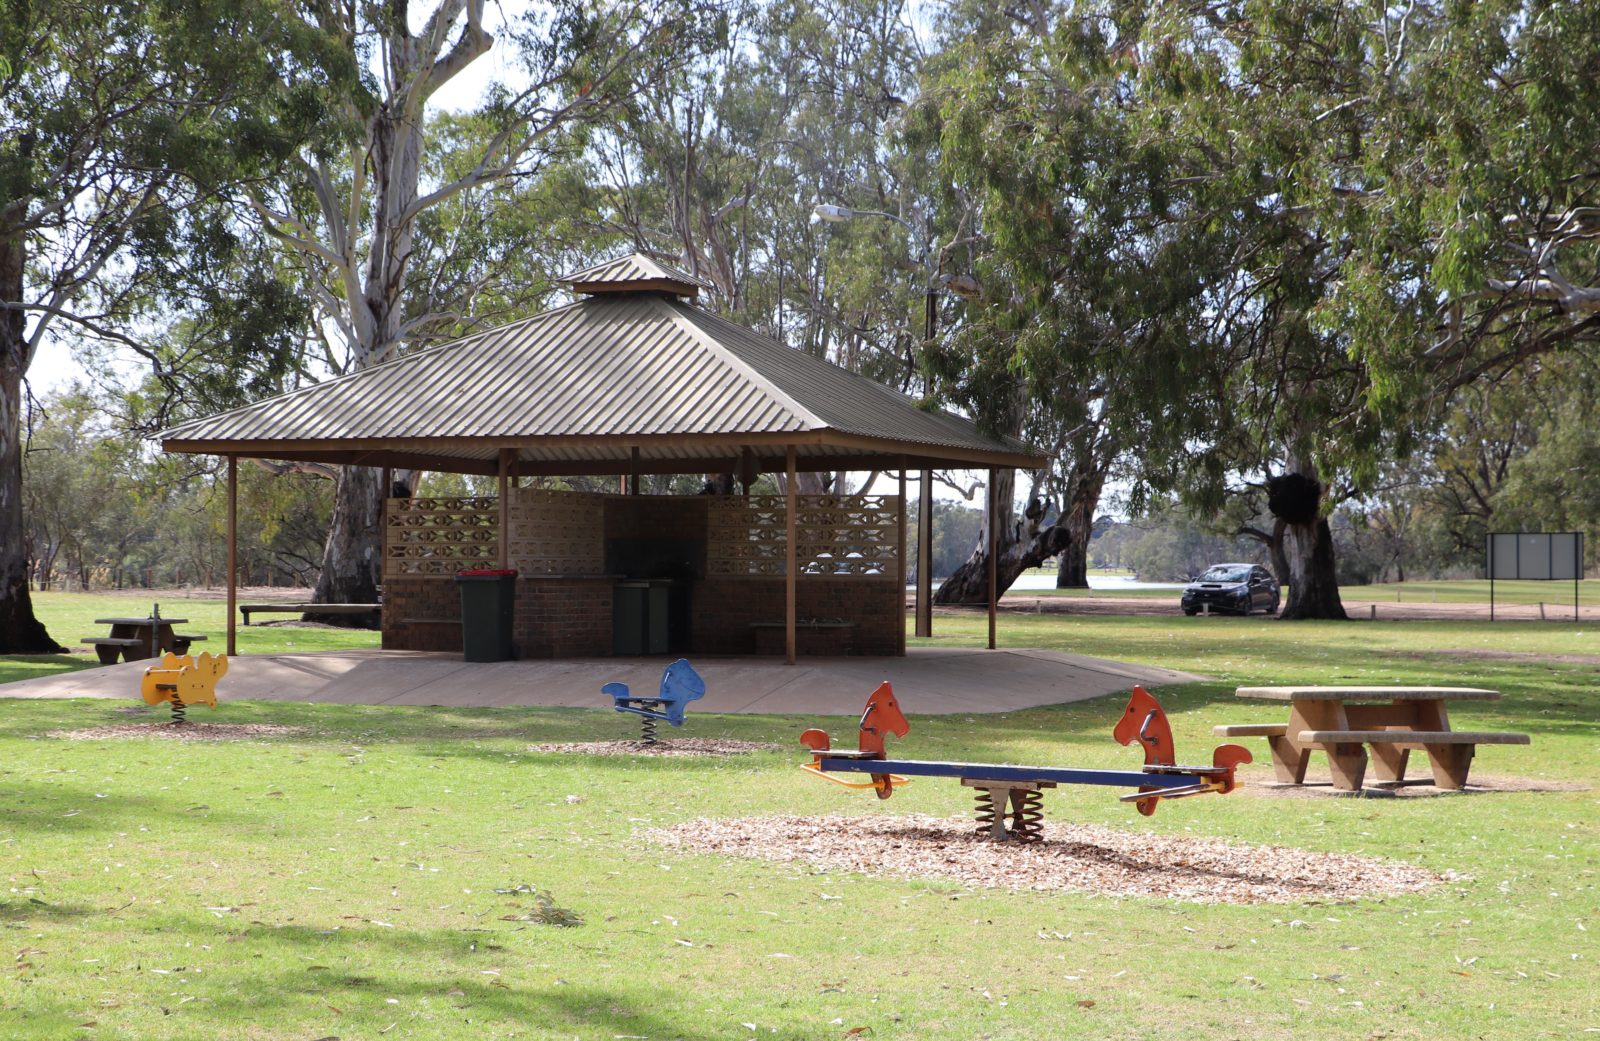 There are barbecue facilities and a shelter, plus a playground.